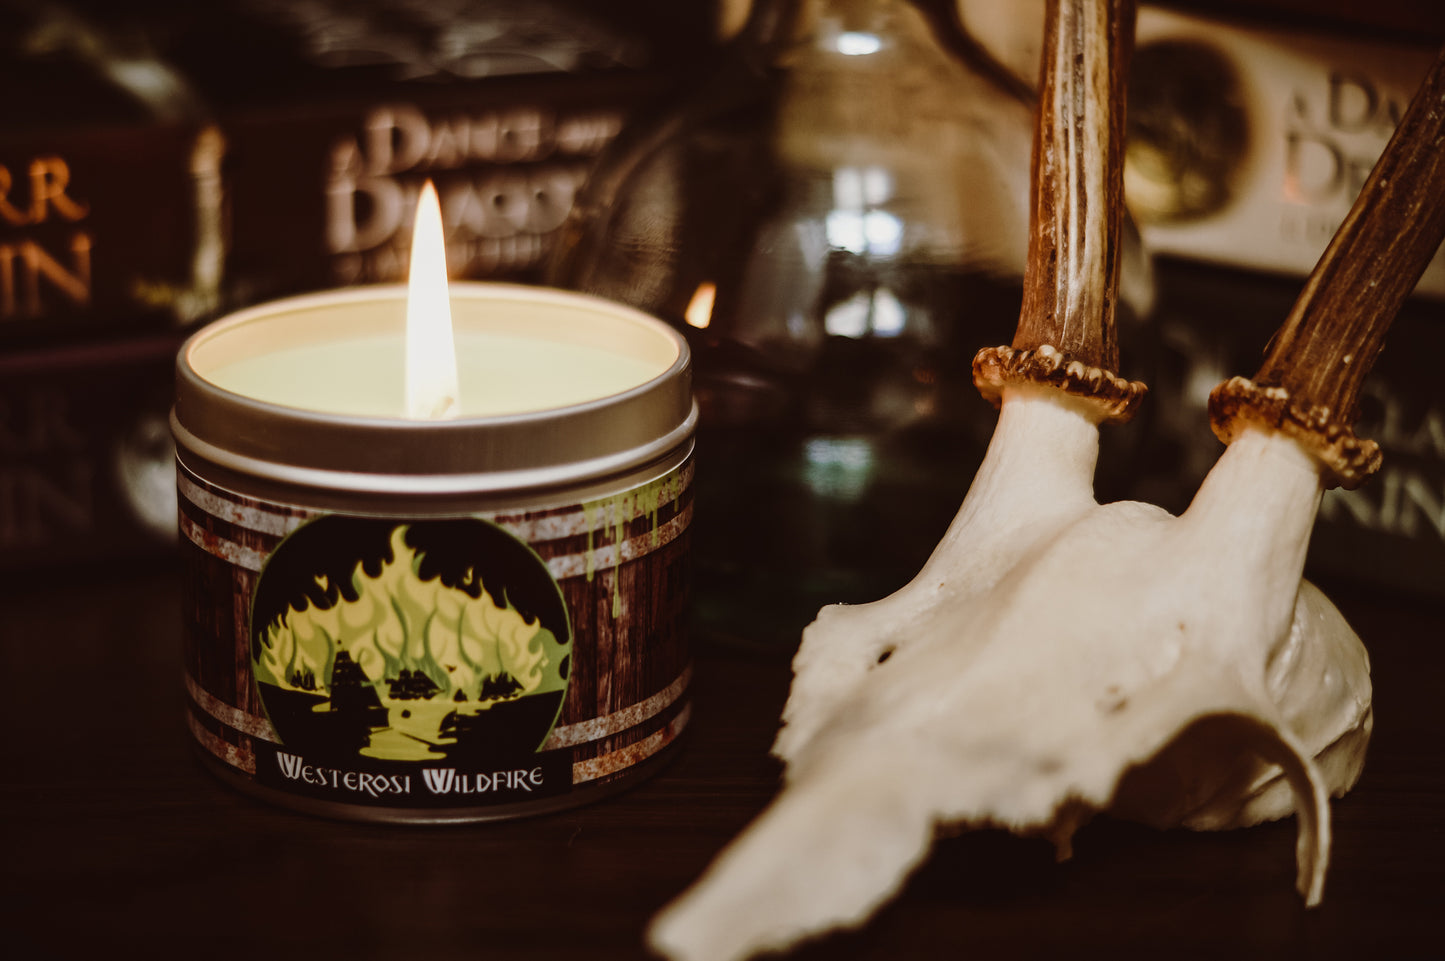 Happy Piranaha's Westerosi Wildfire scented candle alight by skull